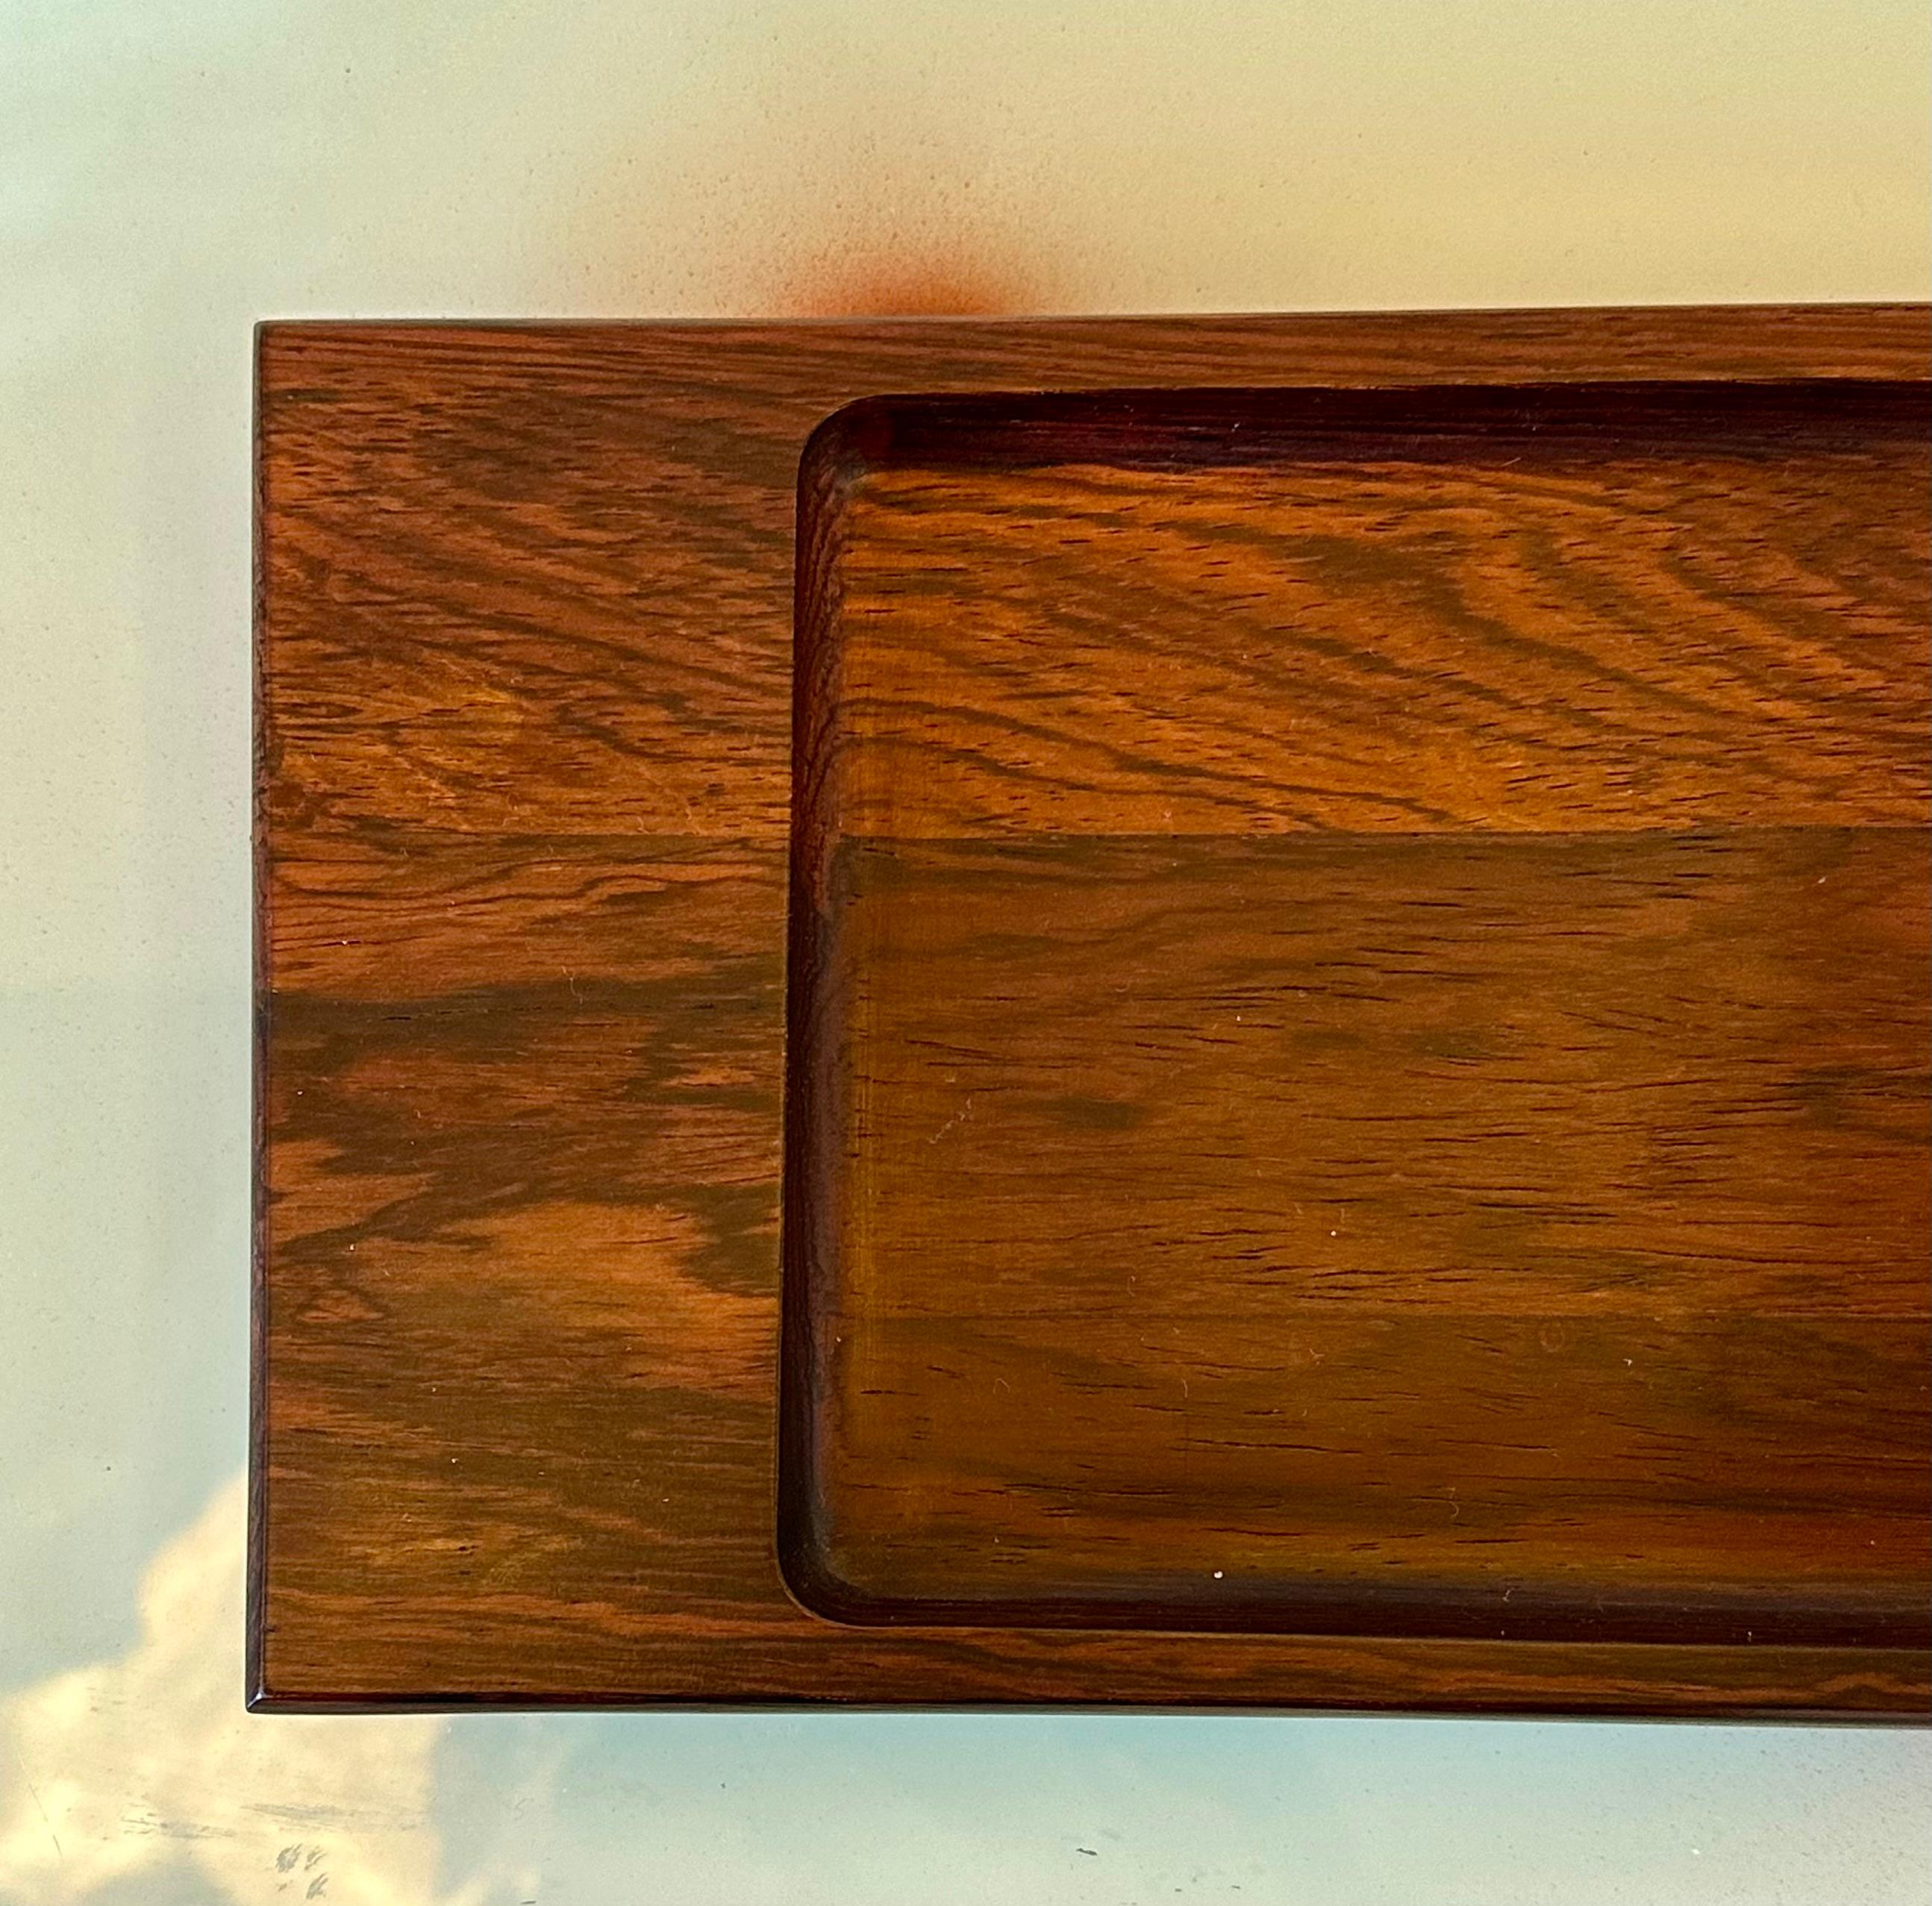 This rectangular tray of the model 304, by Jean Gillon, dates from about 1960. Made of solid wood, this top has dimensions of 2 x 35 x 12 centimeters. The authenticity of this creation is highlighted by the presence of the Wood Art 1/304 label,